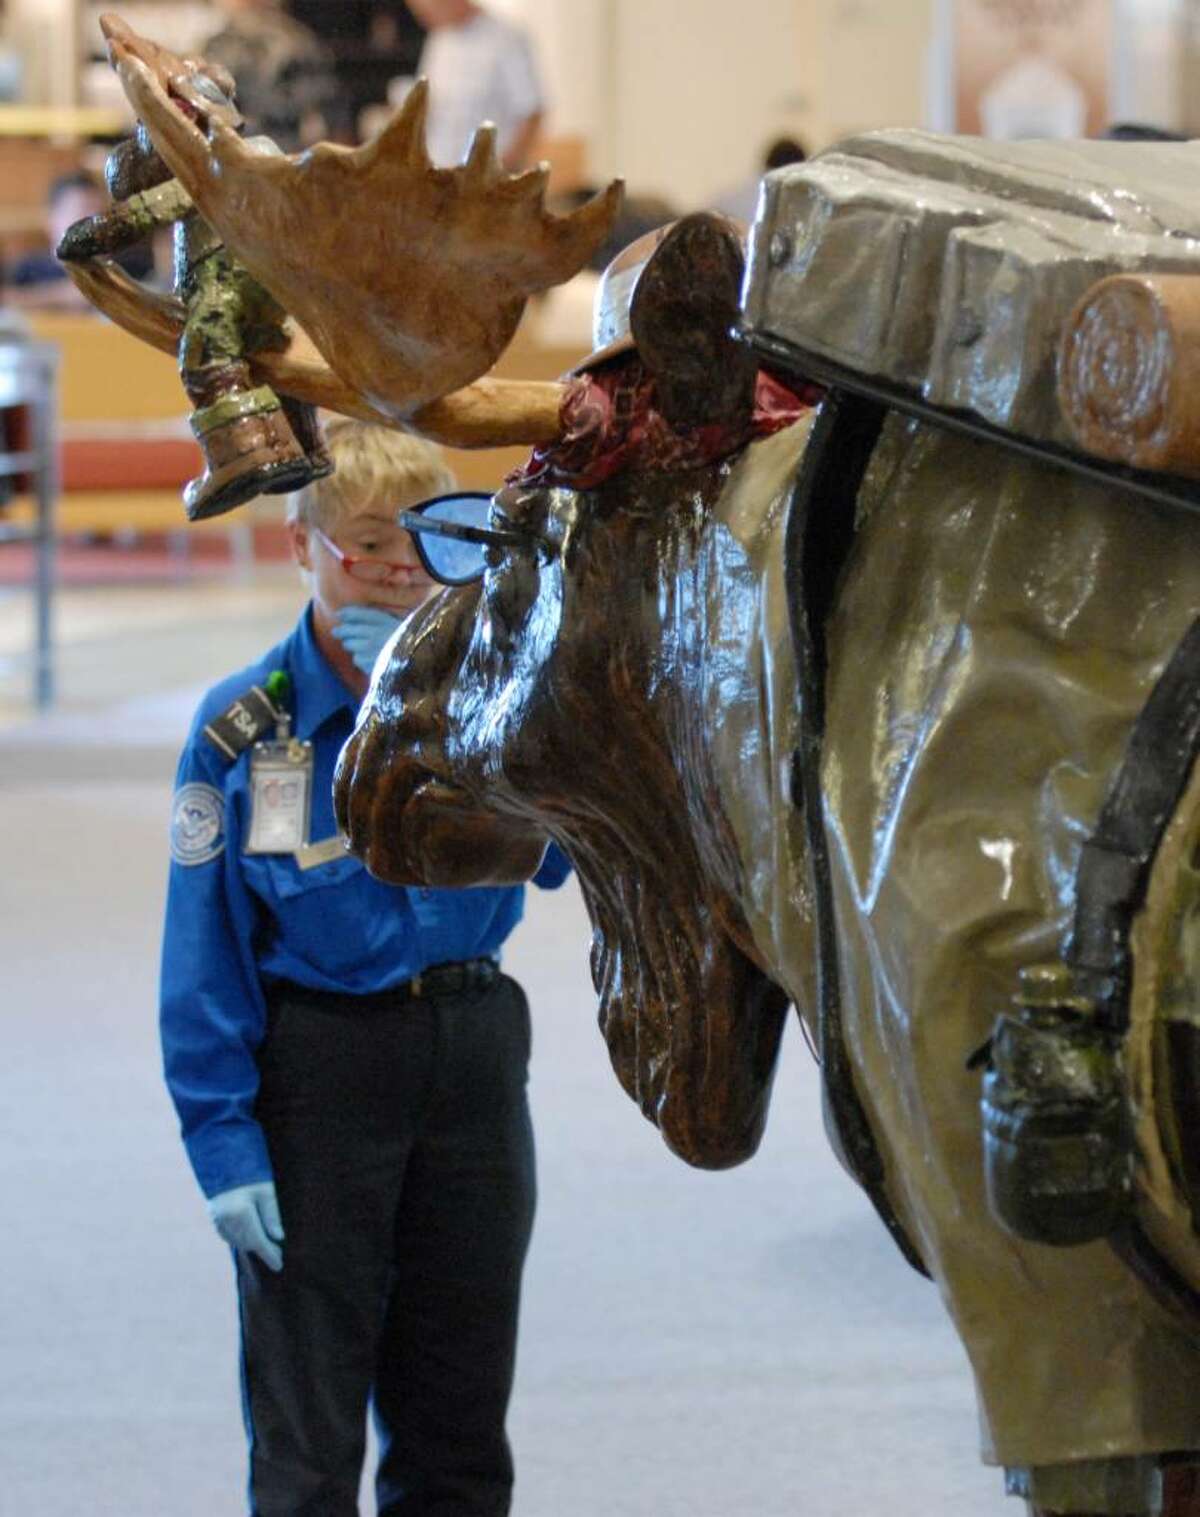 "On The Trail Again," a seven-foot-tall fiberglass moose created by artists Bill Brassard and Paul Hilliard, is screened by TSA personnel at Albany international Airport, Monday morning Sept. 28, 2009. The moose is on display at the airport to promote Moosefest 2009, which runs through October in Bennington VT. (Will Waldron / Times Union)